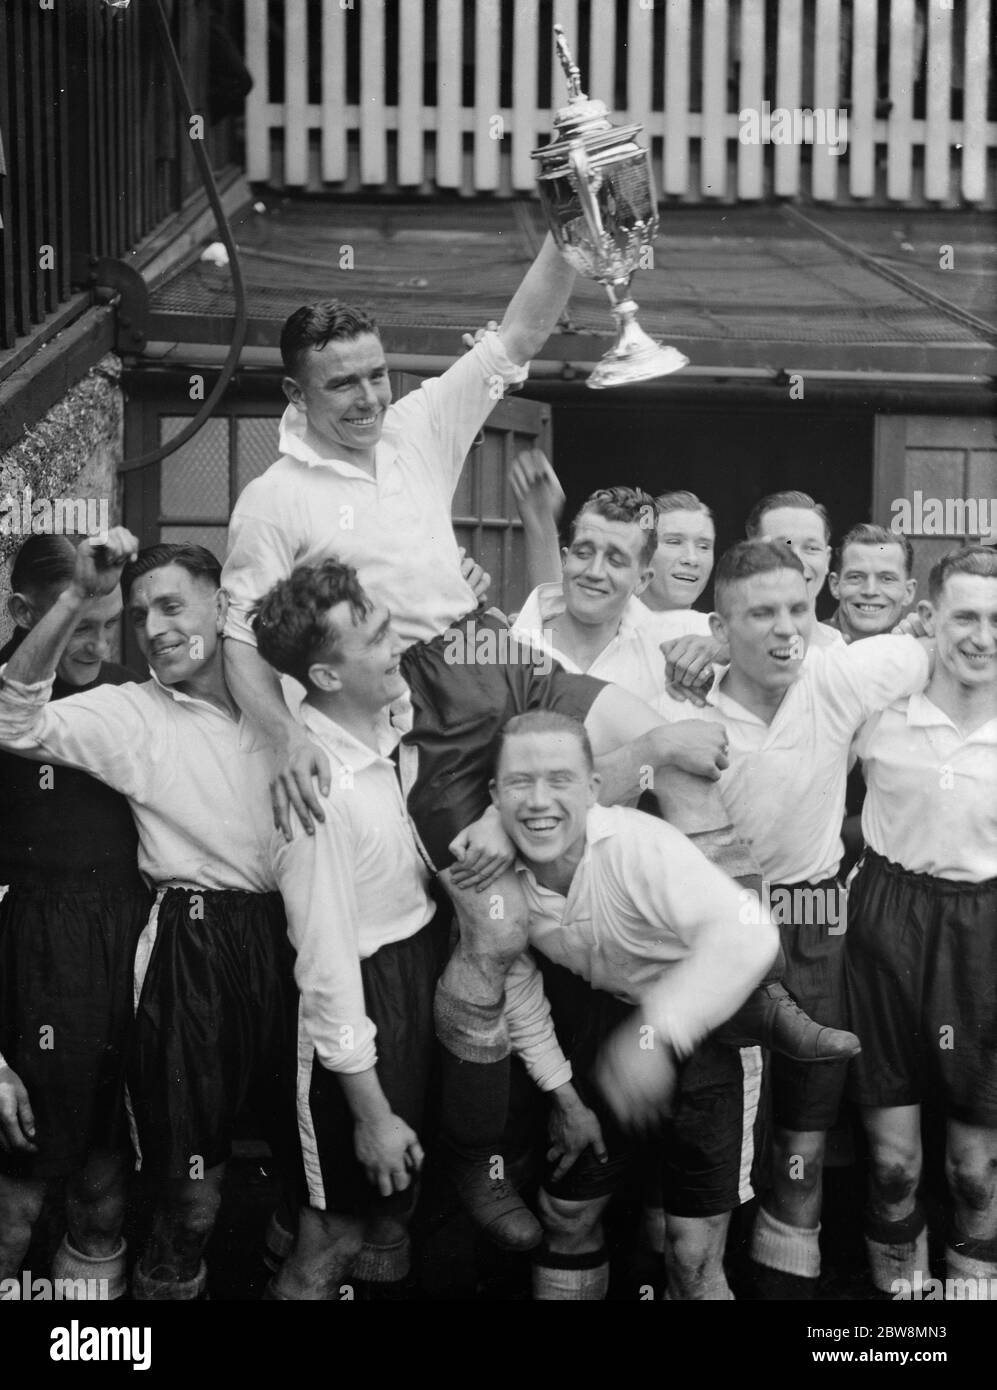 Bromley football club versus Belvedere football club in the FA Amateur Cup Final at Millwall football club stadium the The Den in South Bermondsey, London . Bromley the winning team hold the cup aloft . 1938 Stock Photo